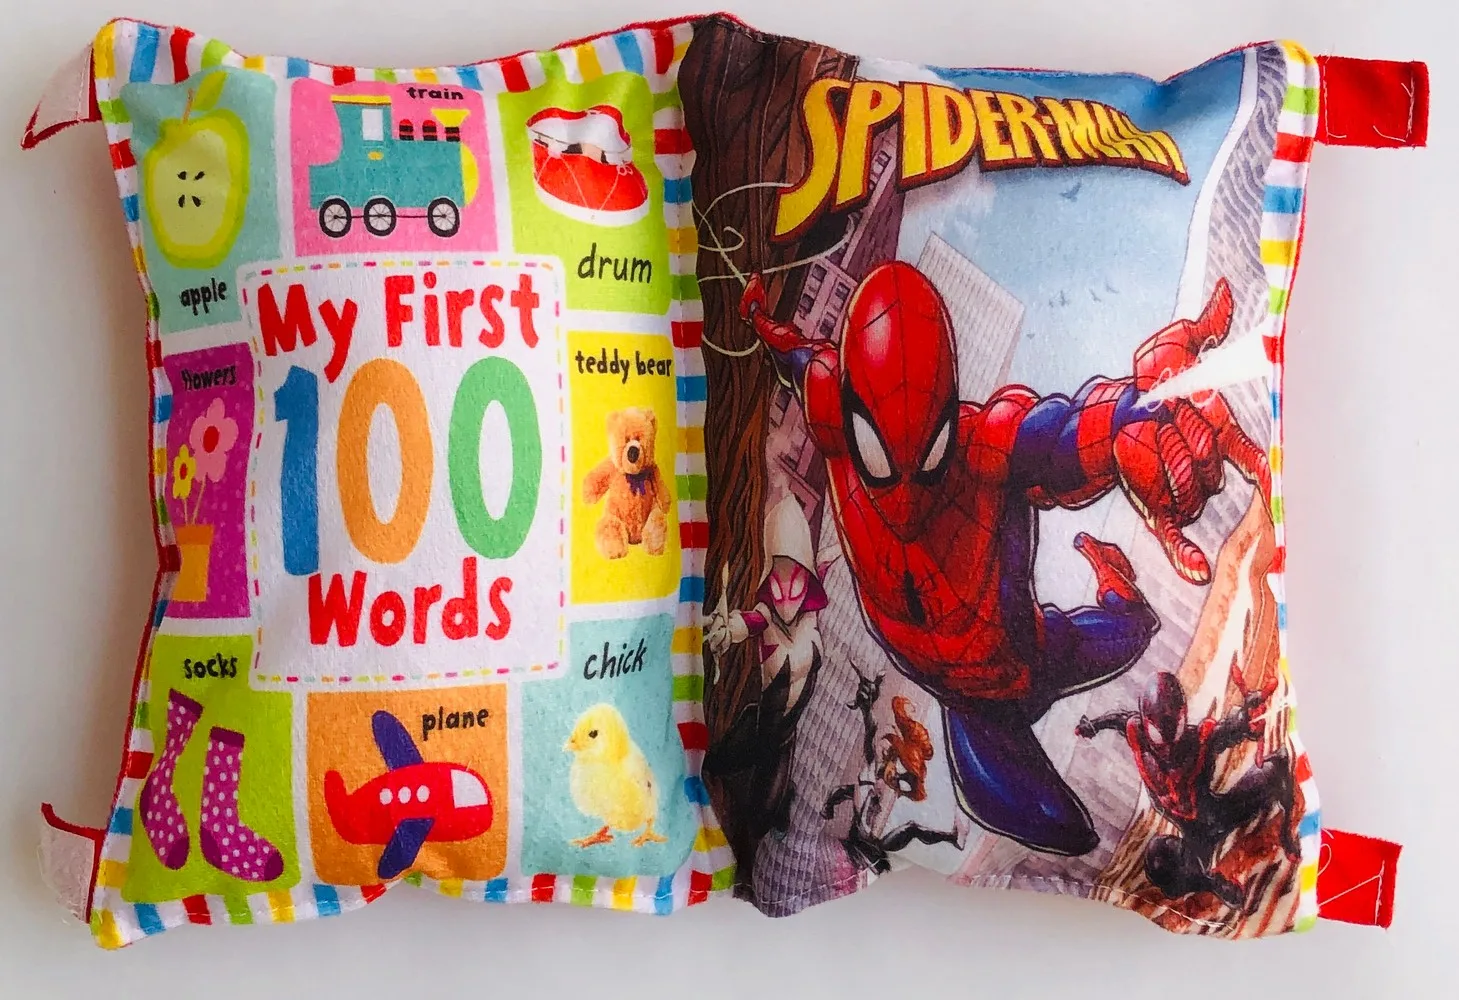 Learning book kids pillow, 100 Words, Spiderman